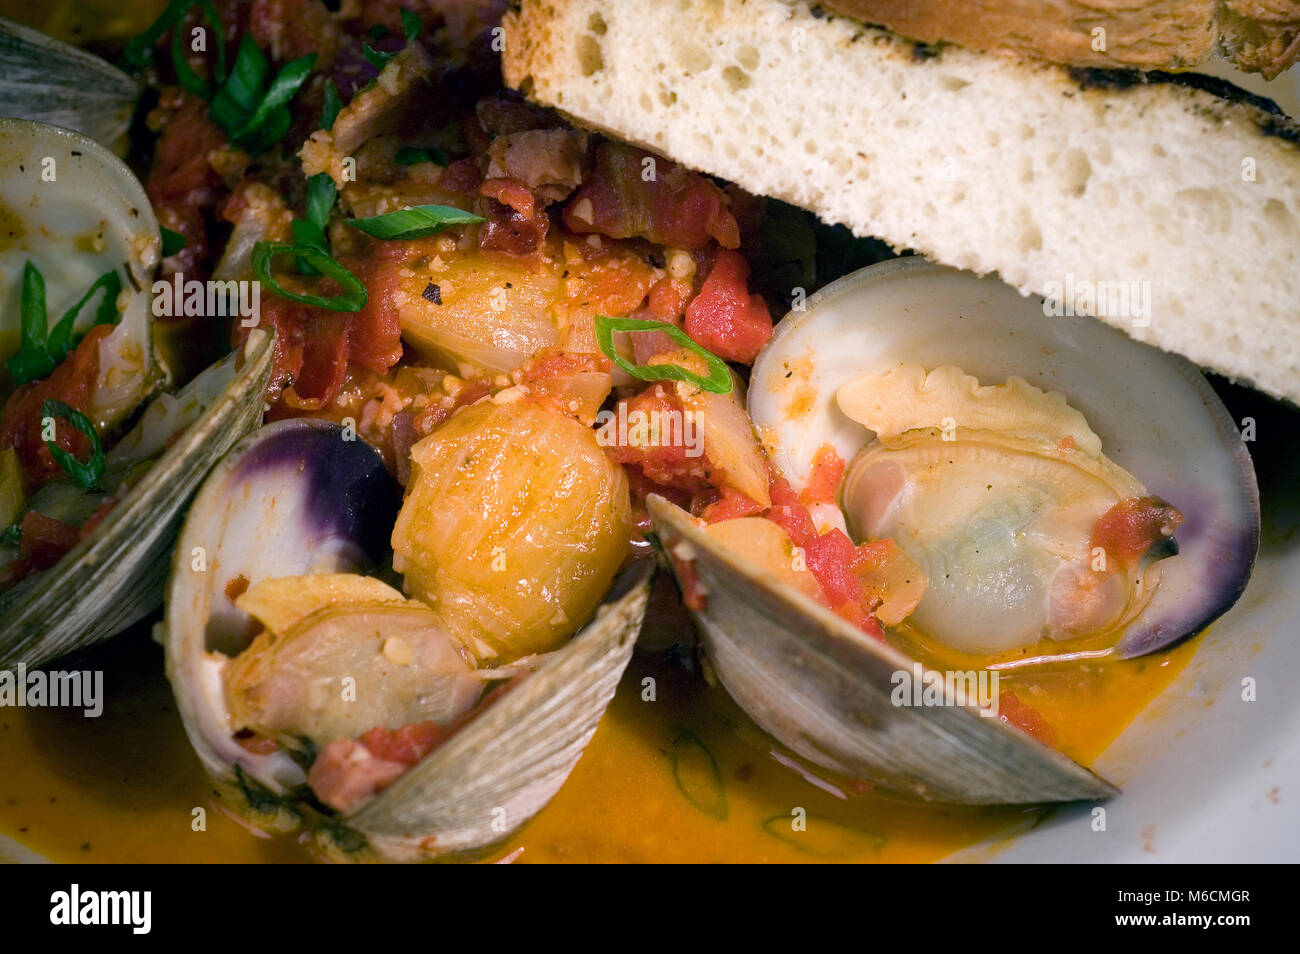 Steamed Little Necks - Served at a Cape Cod restaurant Stock Photo